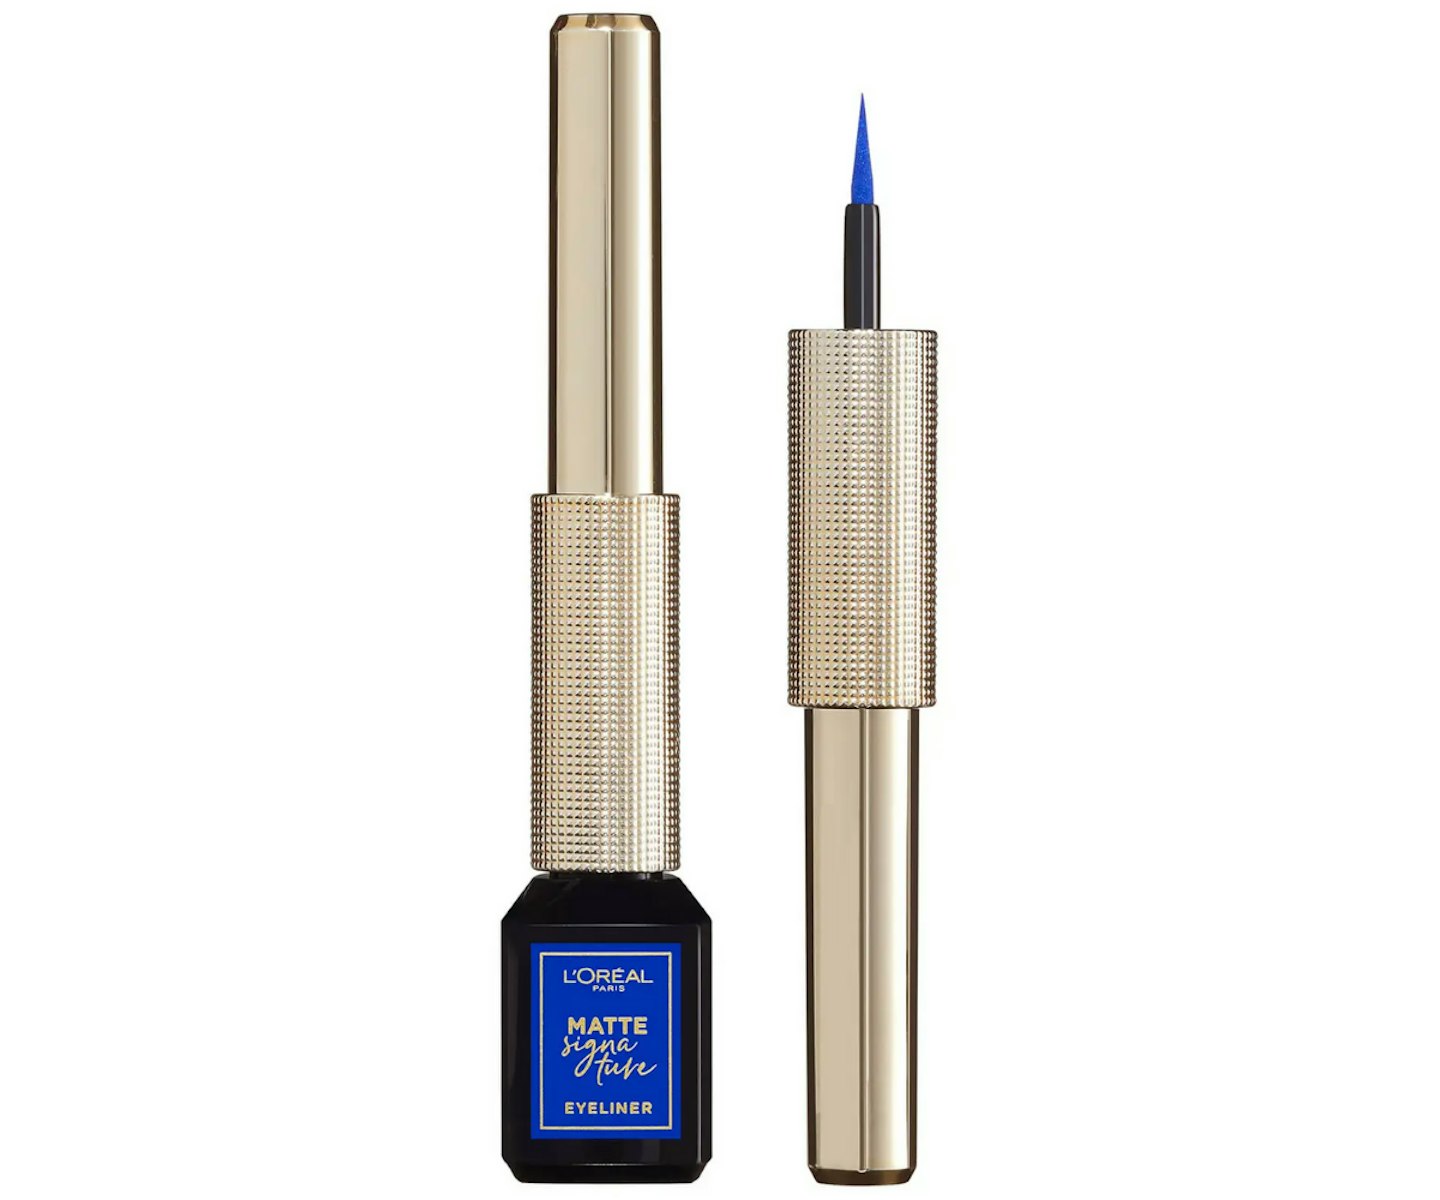 A picture of the L'Oreal Matte Signature Liquid Eyeliner in the shade Blue.